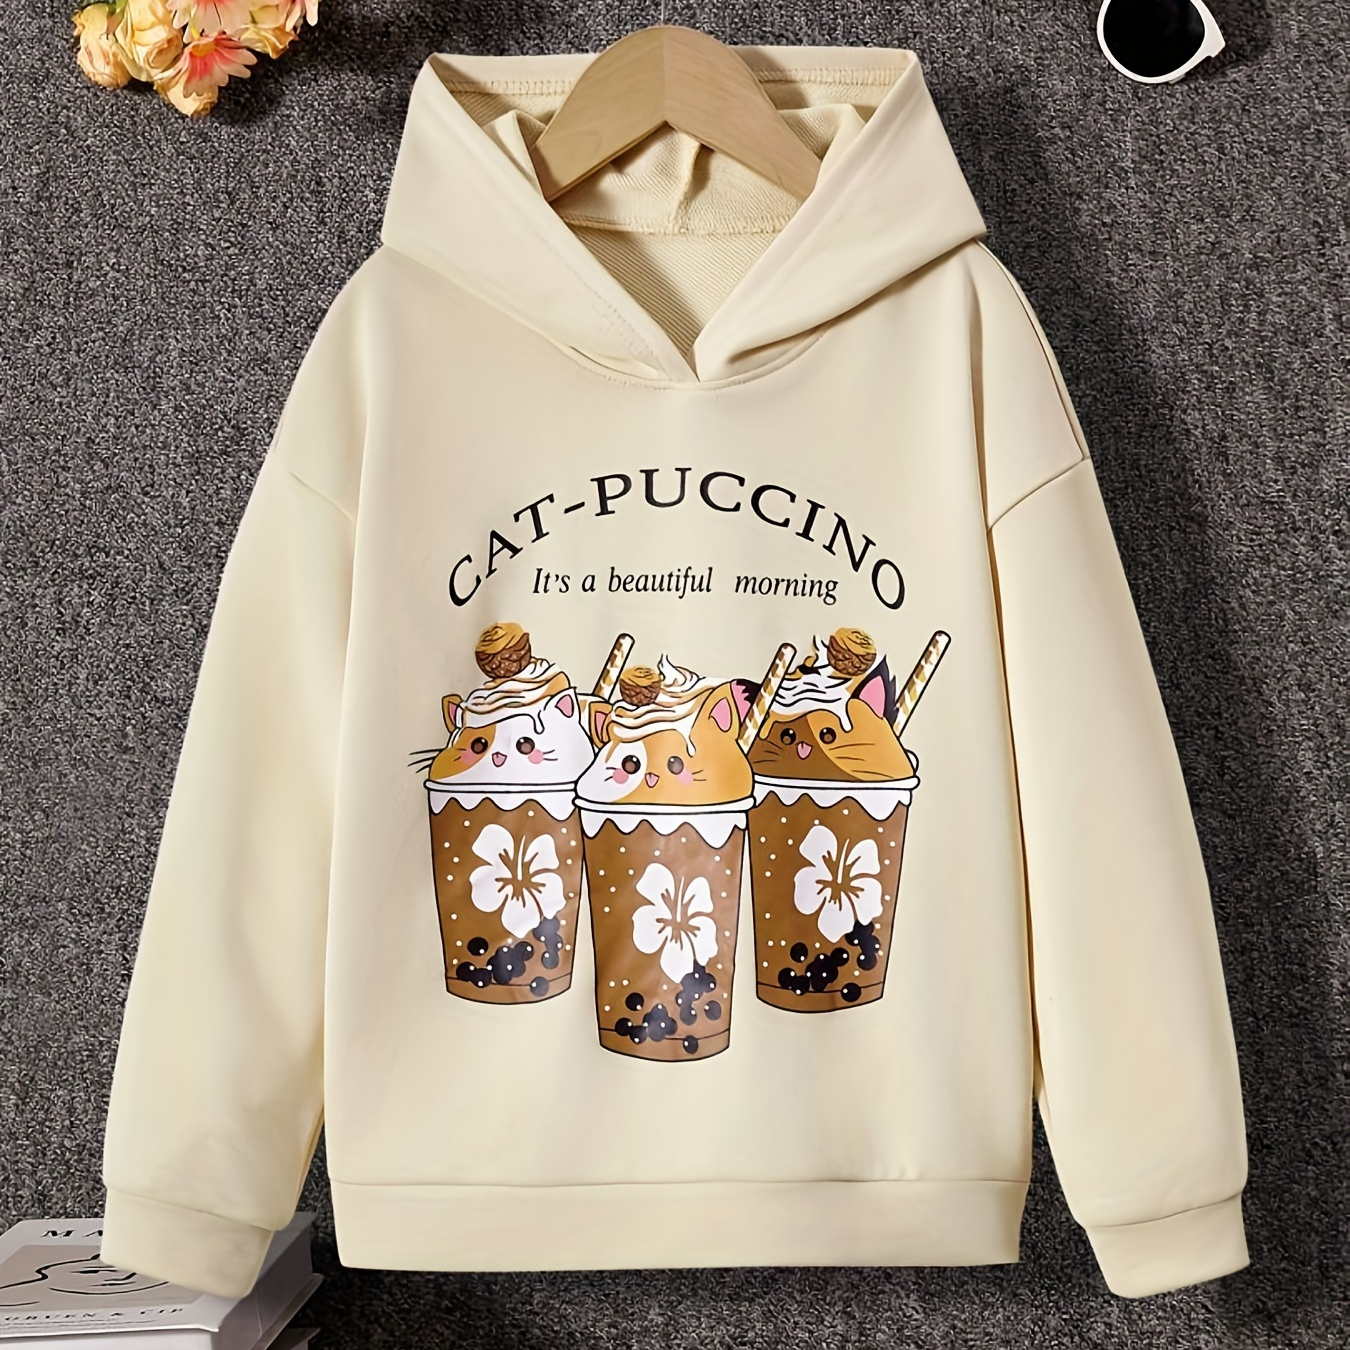 

Girls Cartoon Cat Puccino Graphic Casual Hoodie Sweatshirt Tops, Kids Teens Pullovers For Spring/ Fall, Gift Idea